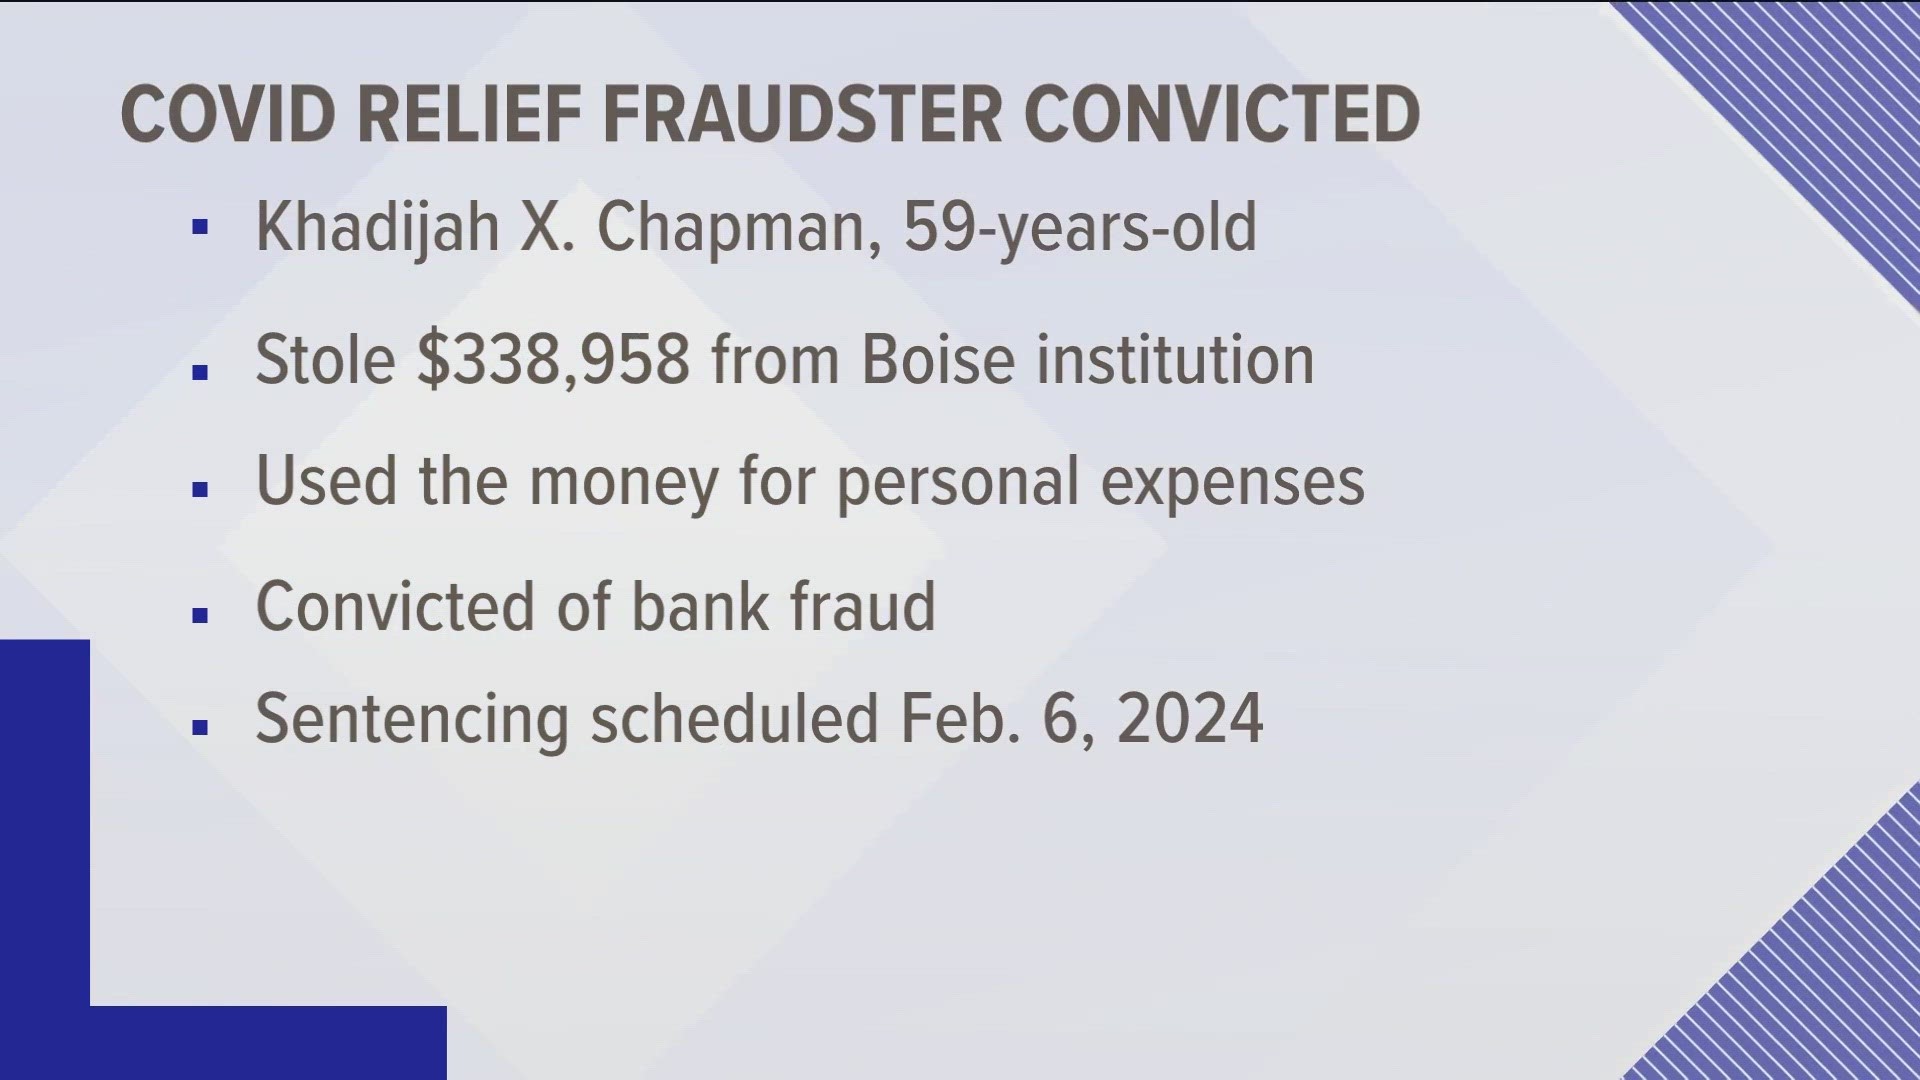 The attorney's office said the 59-year-old woman stole more than $338,000 from an institution in Boise.